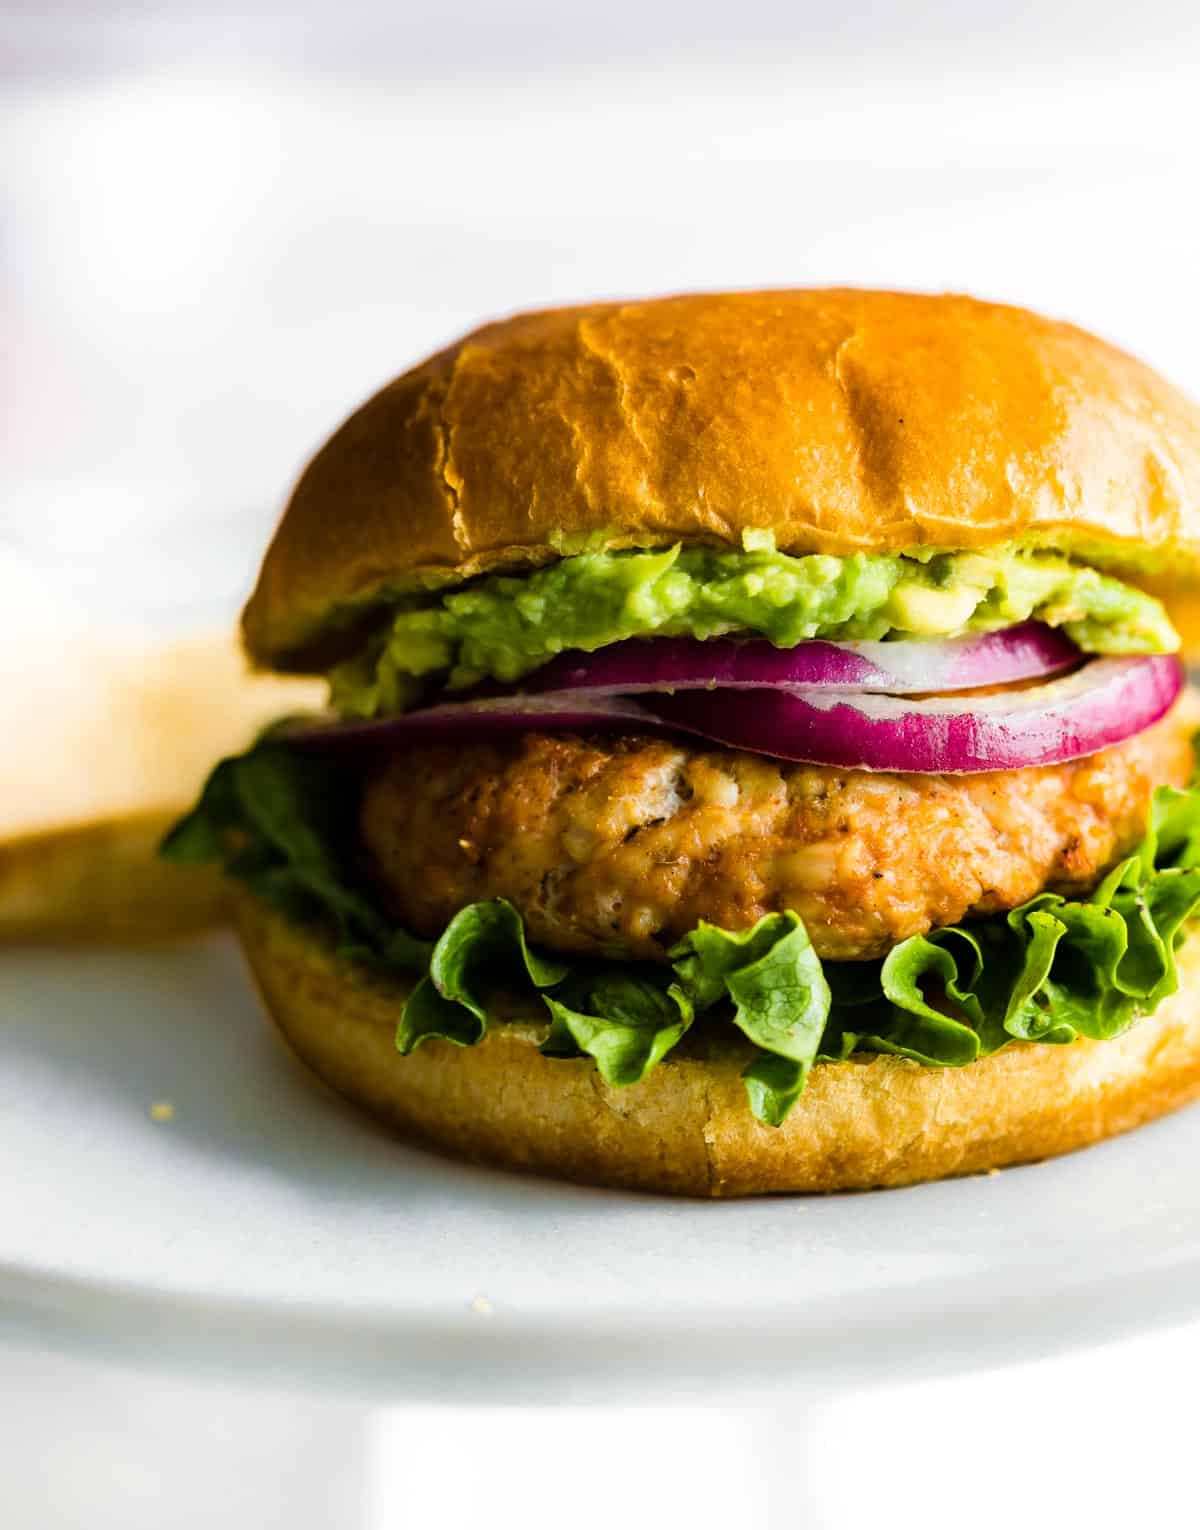 A grilled ground chicken burger with lettuce, red onion, and guacamole.